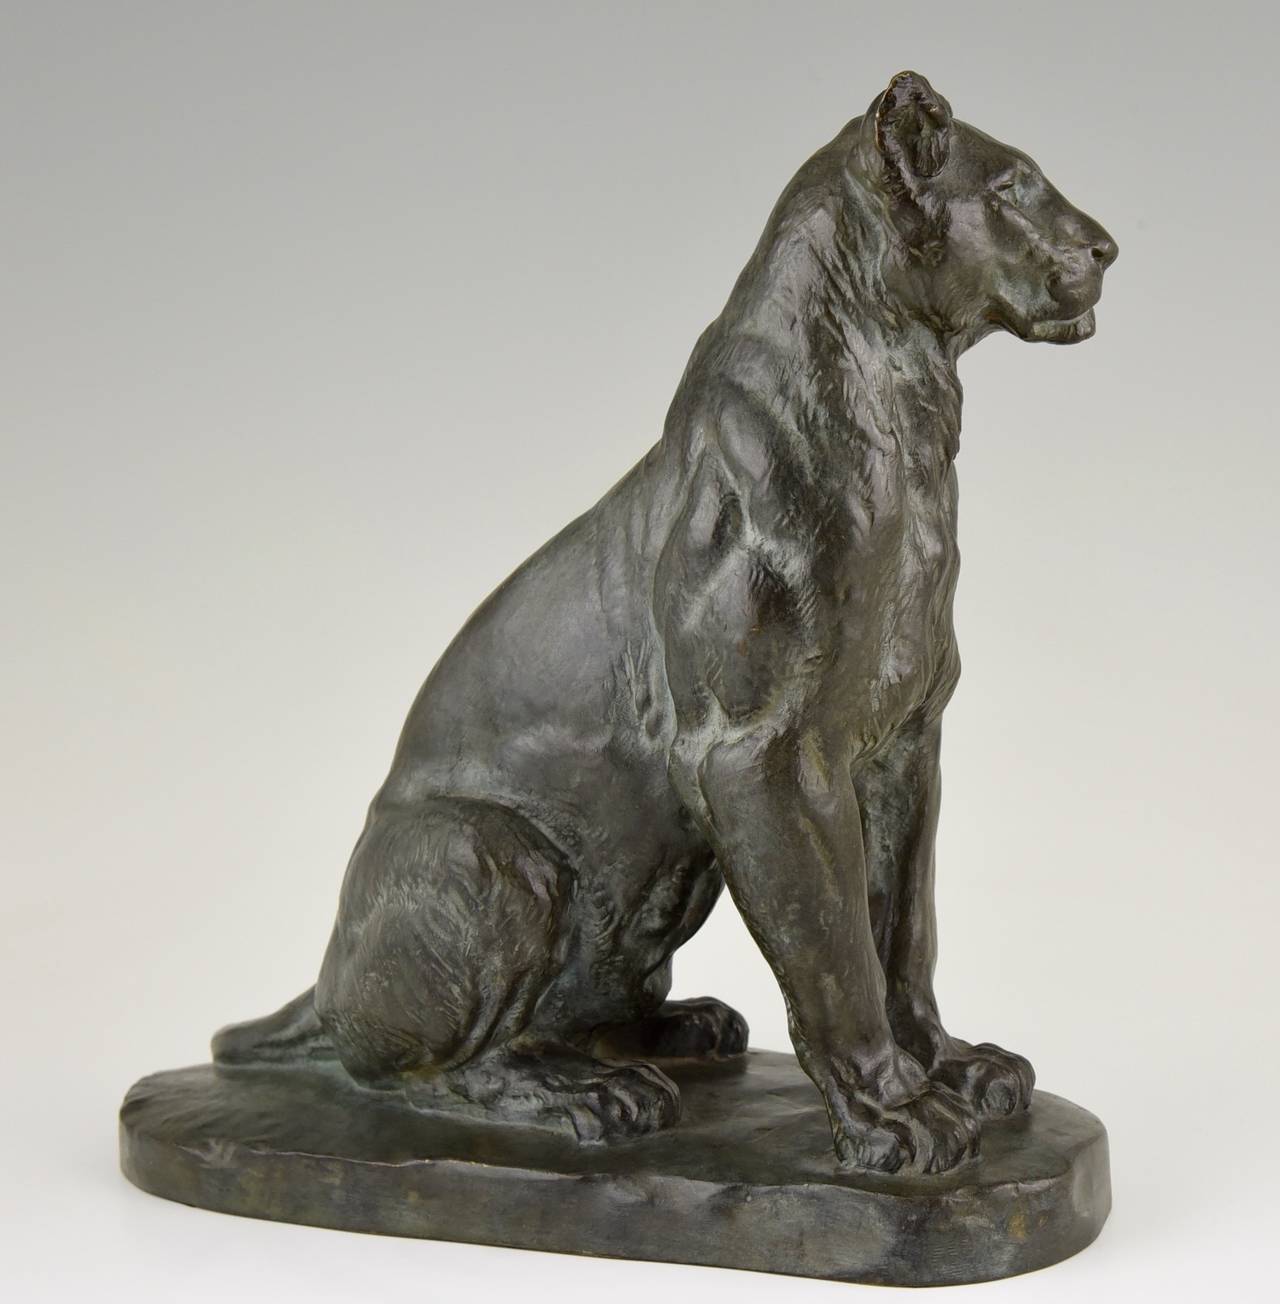 Description:  Bronze of a sitting panther. 
Artist / Maker:  Charles Valton.
Signature / Marks:  C. Valton.

Material:  Bronze with green patina.
Origin:  France. 
Date: 1910.
 
Size: 
H 10.4 inch X H 10.2 inch x W 4.3 inch. 
H 26.5. cm. x